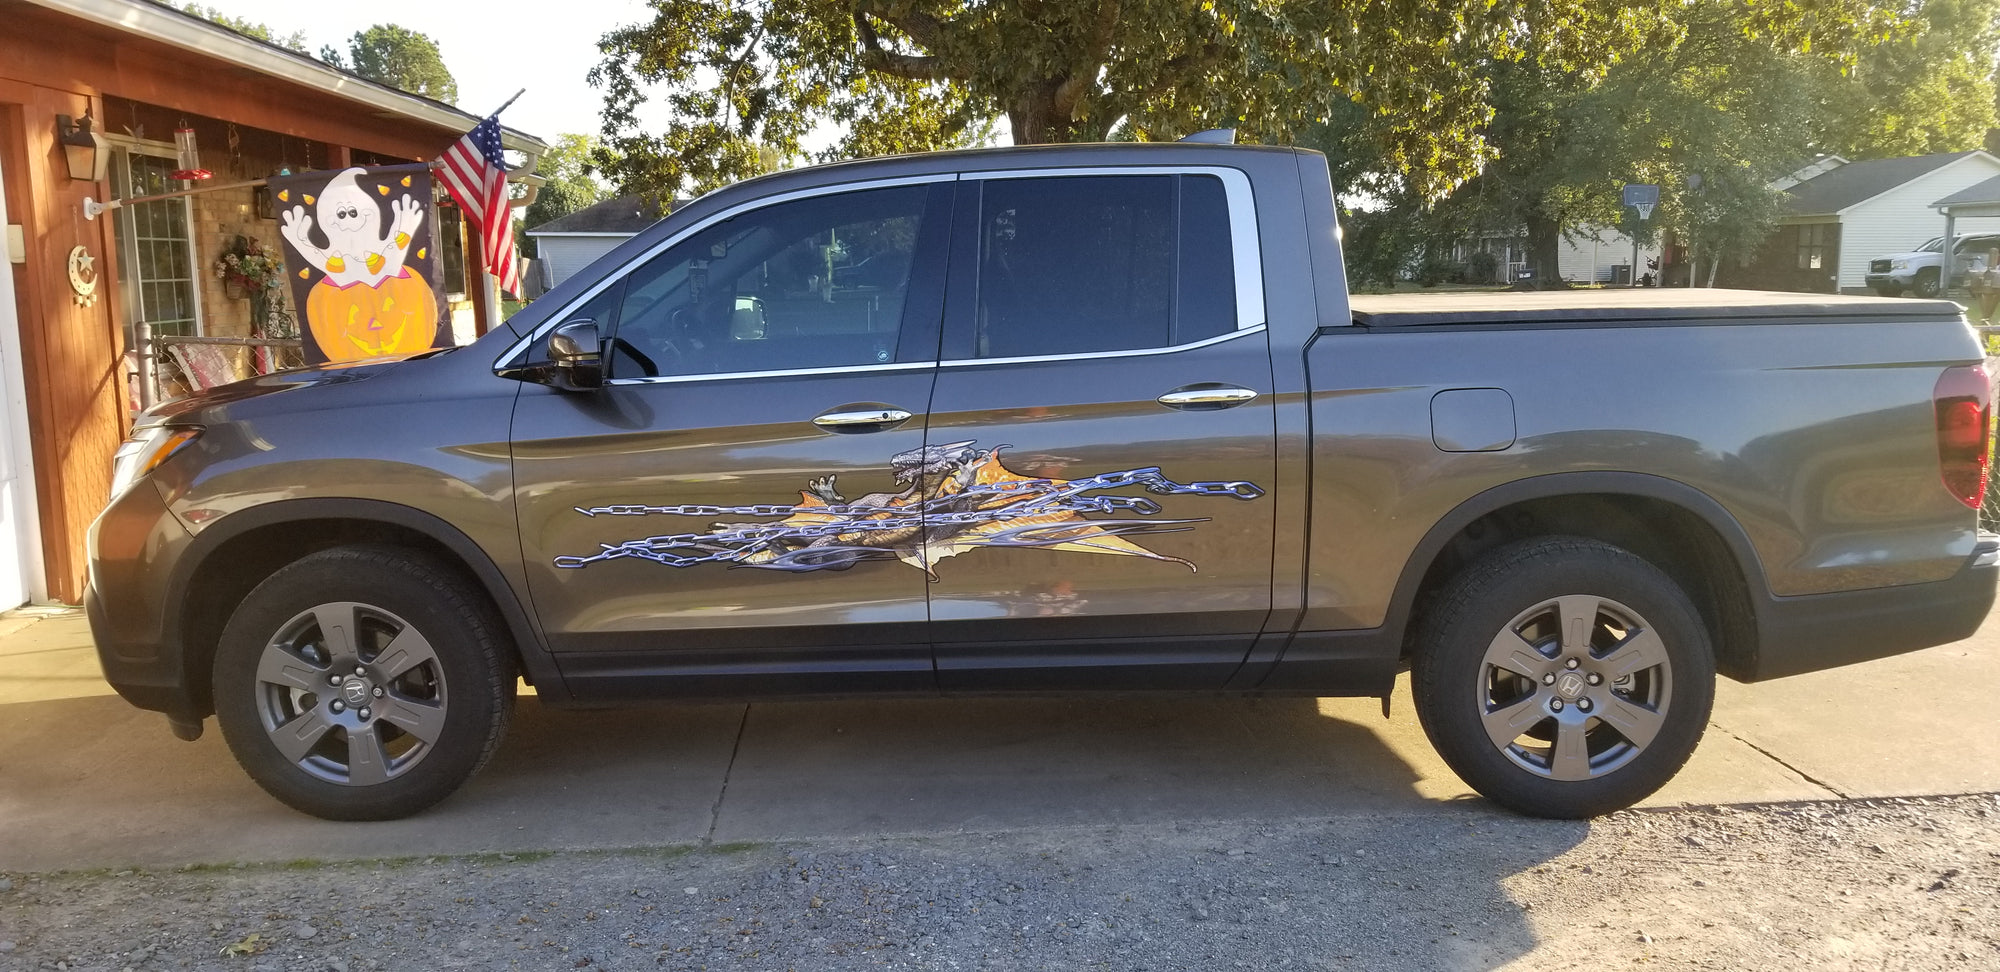 chained dragon decal on the side of a  honda ridgeline truck